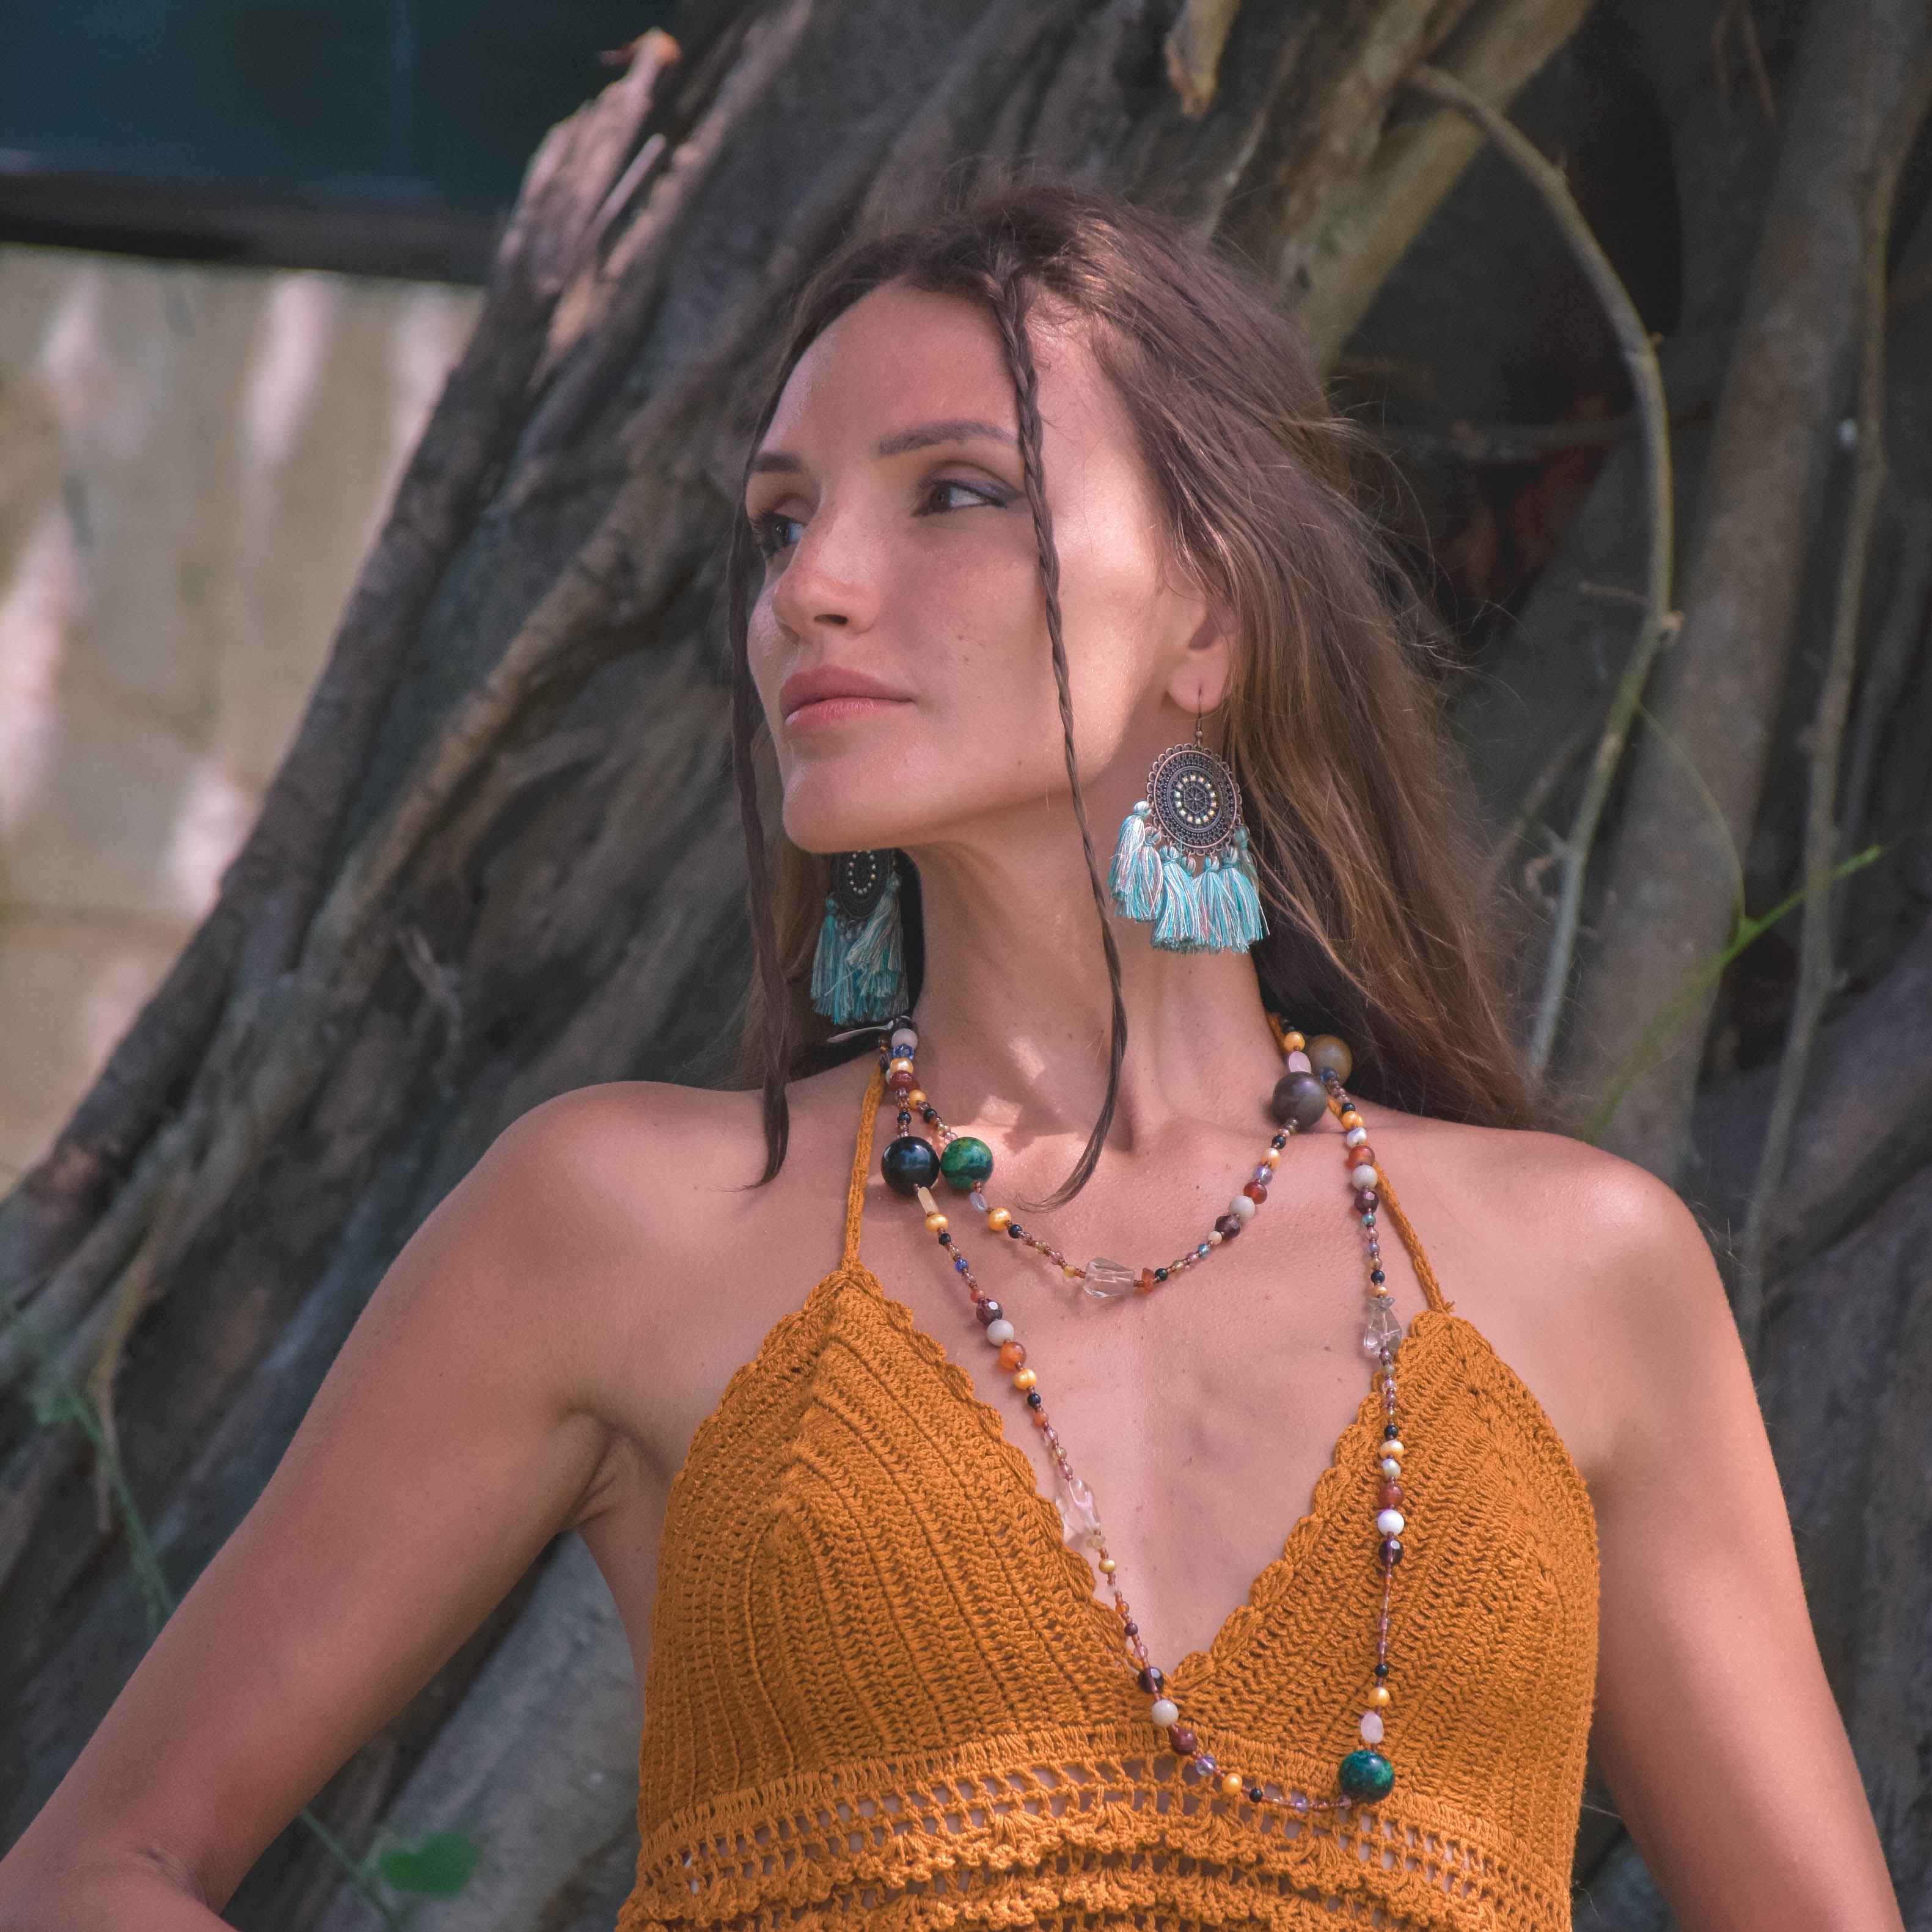 TULUM NECKLACE Elepanta Necklaces - Buy Today Elephant Pants Jewelry And Bohemian Clothes Handmade In Thailand Help To Save The Elephants FairTrade And Vegan